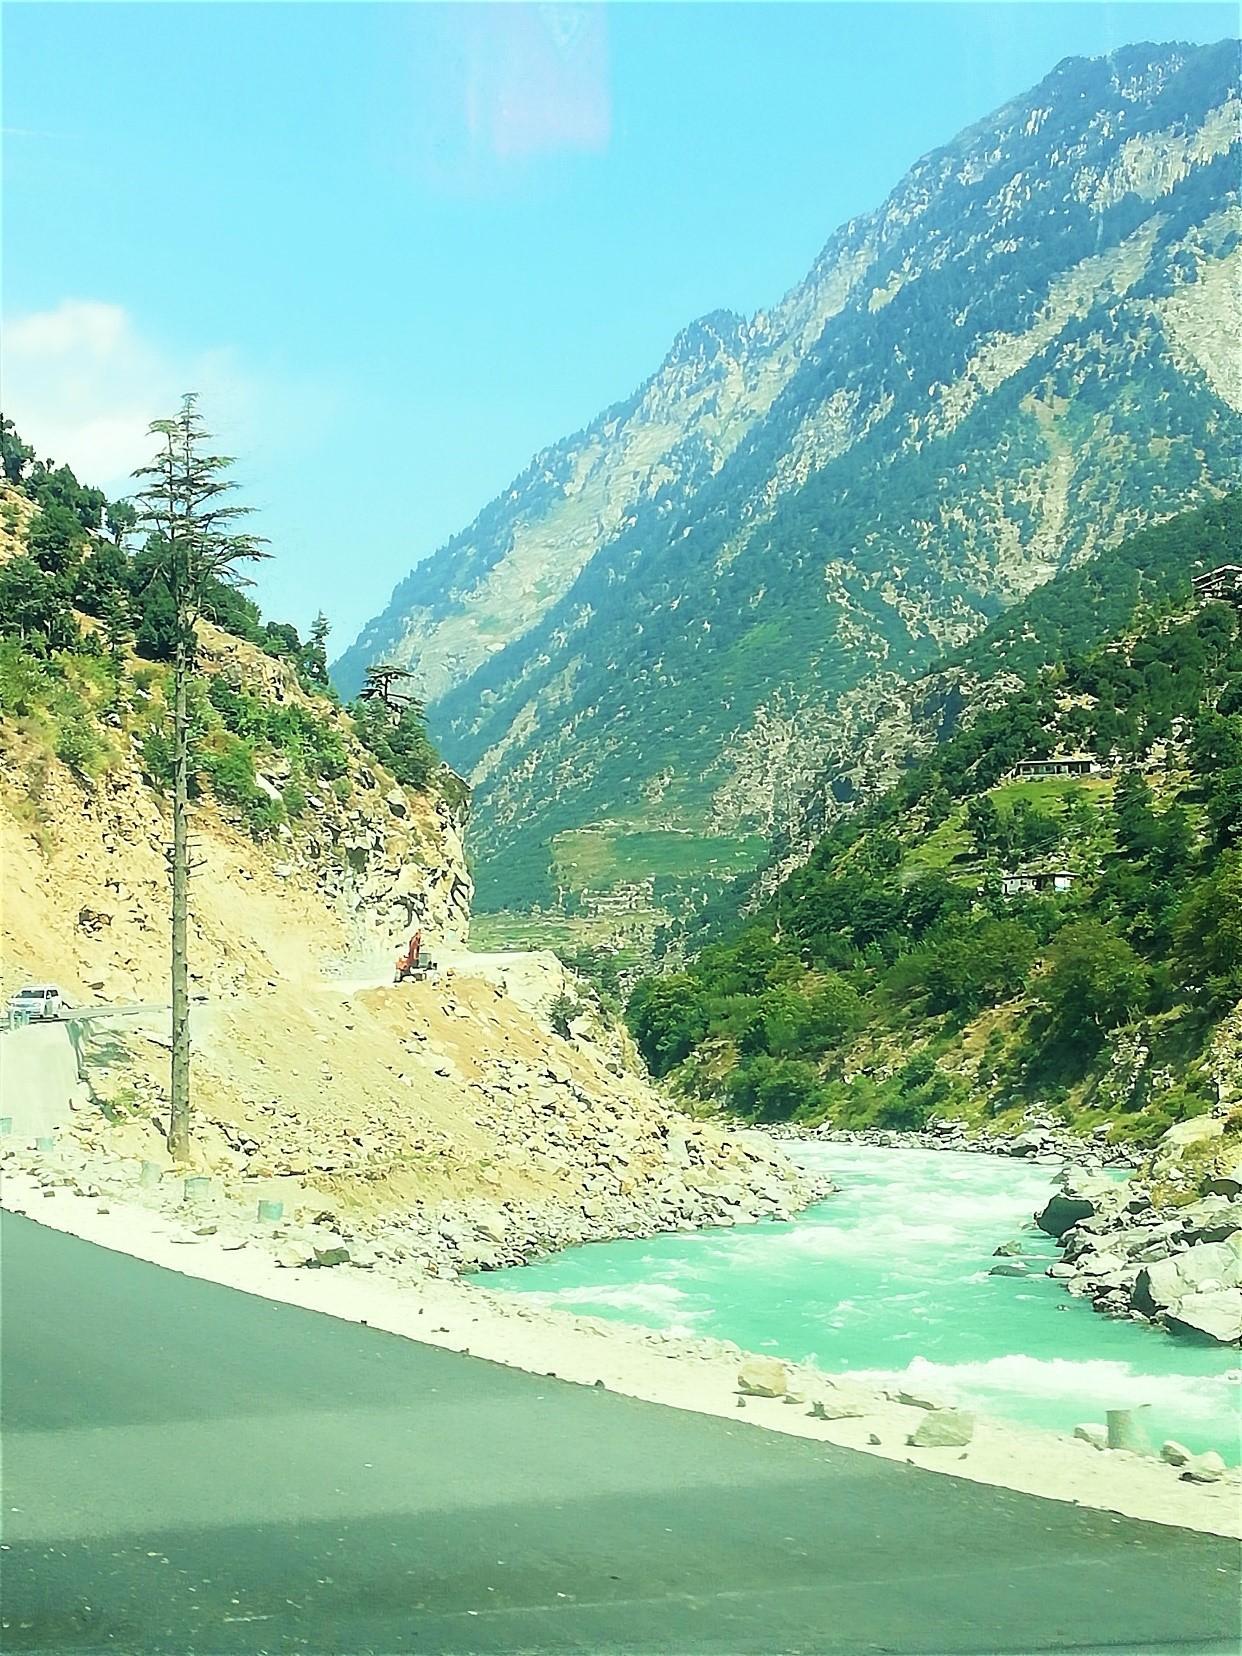 Swat to Kalam route